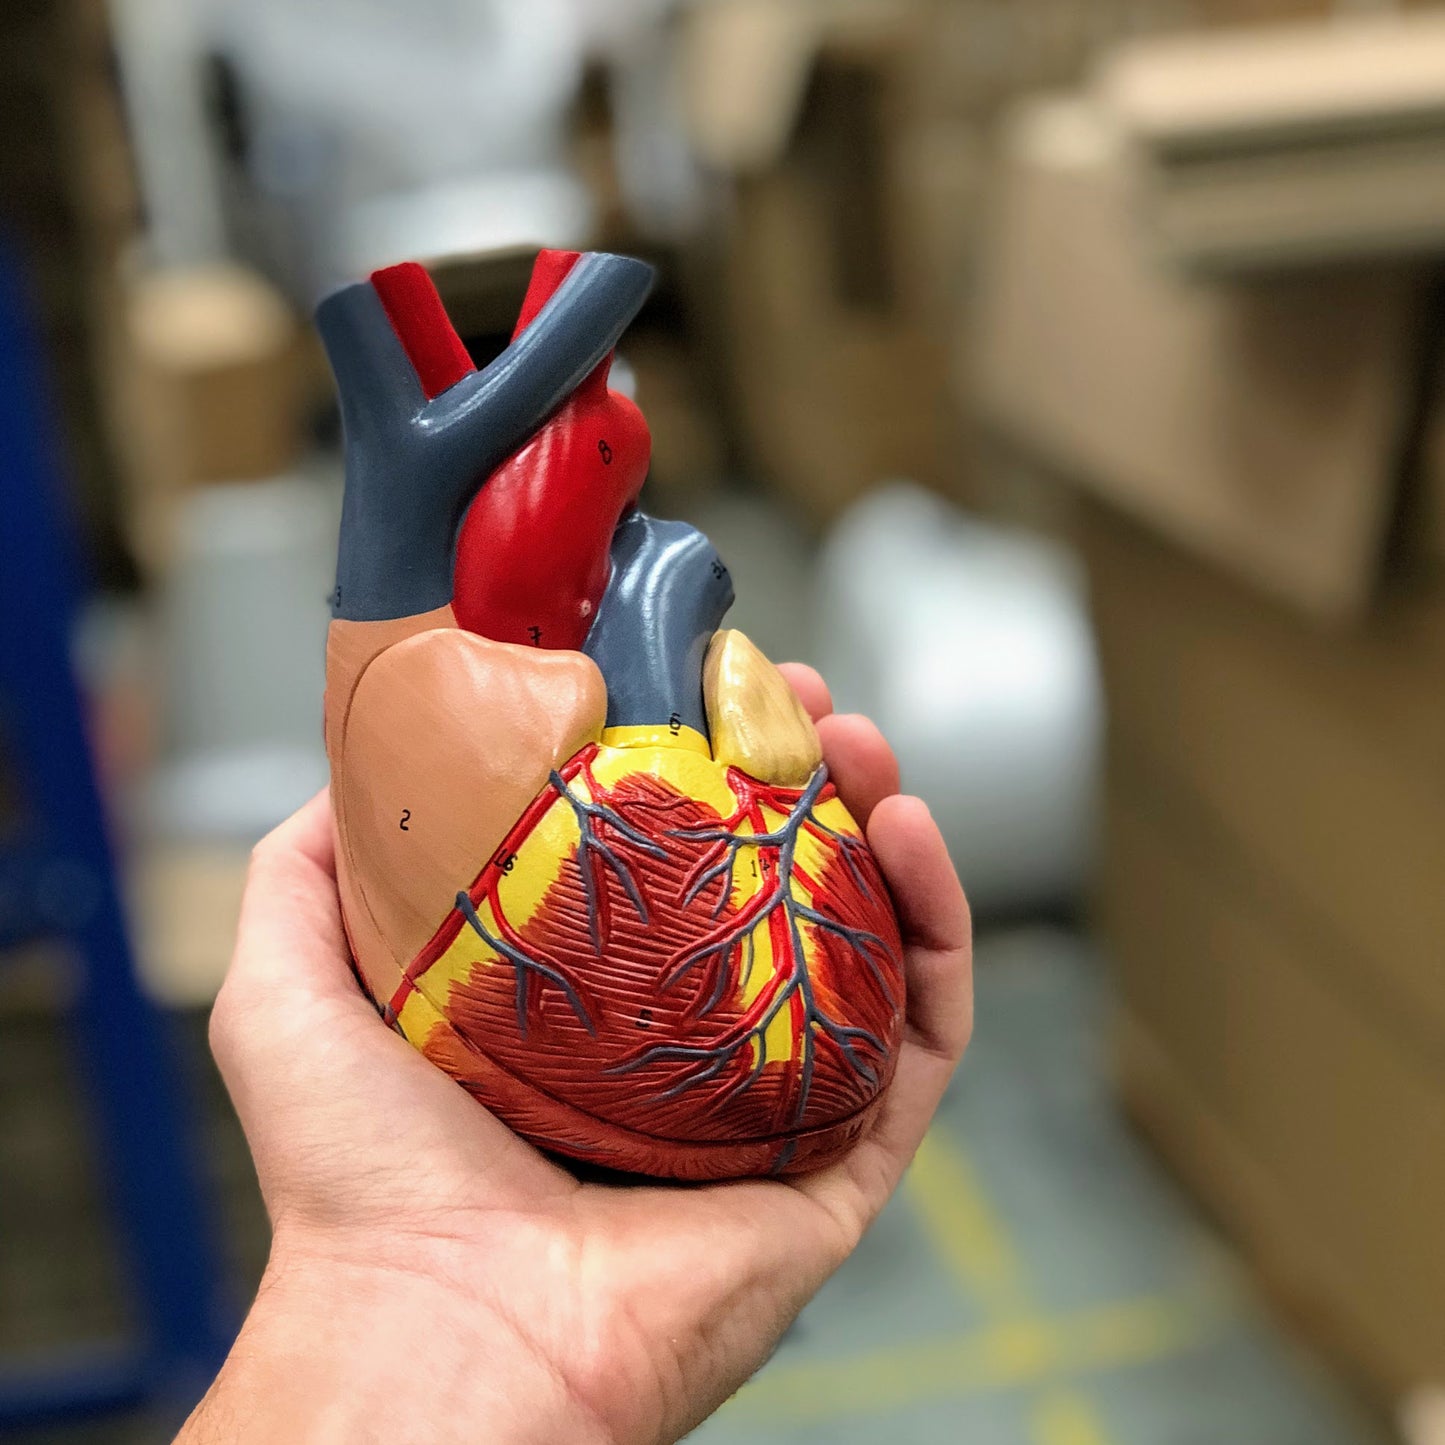 Classic heart model in realistic size